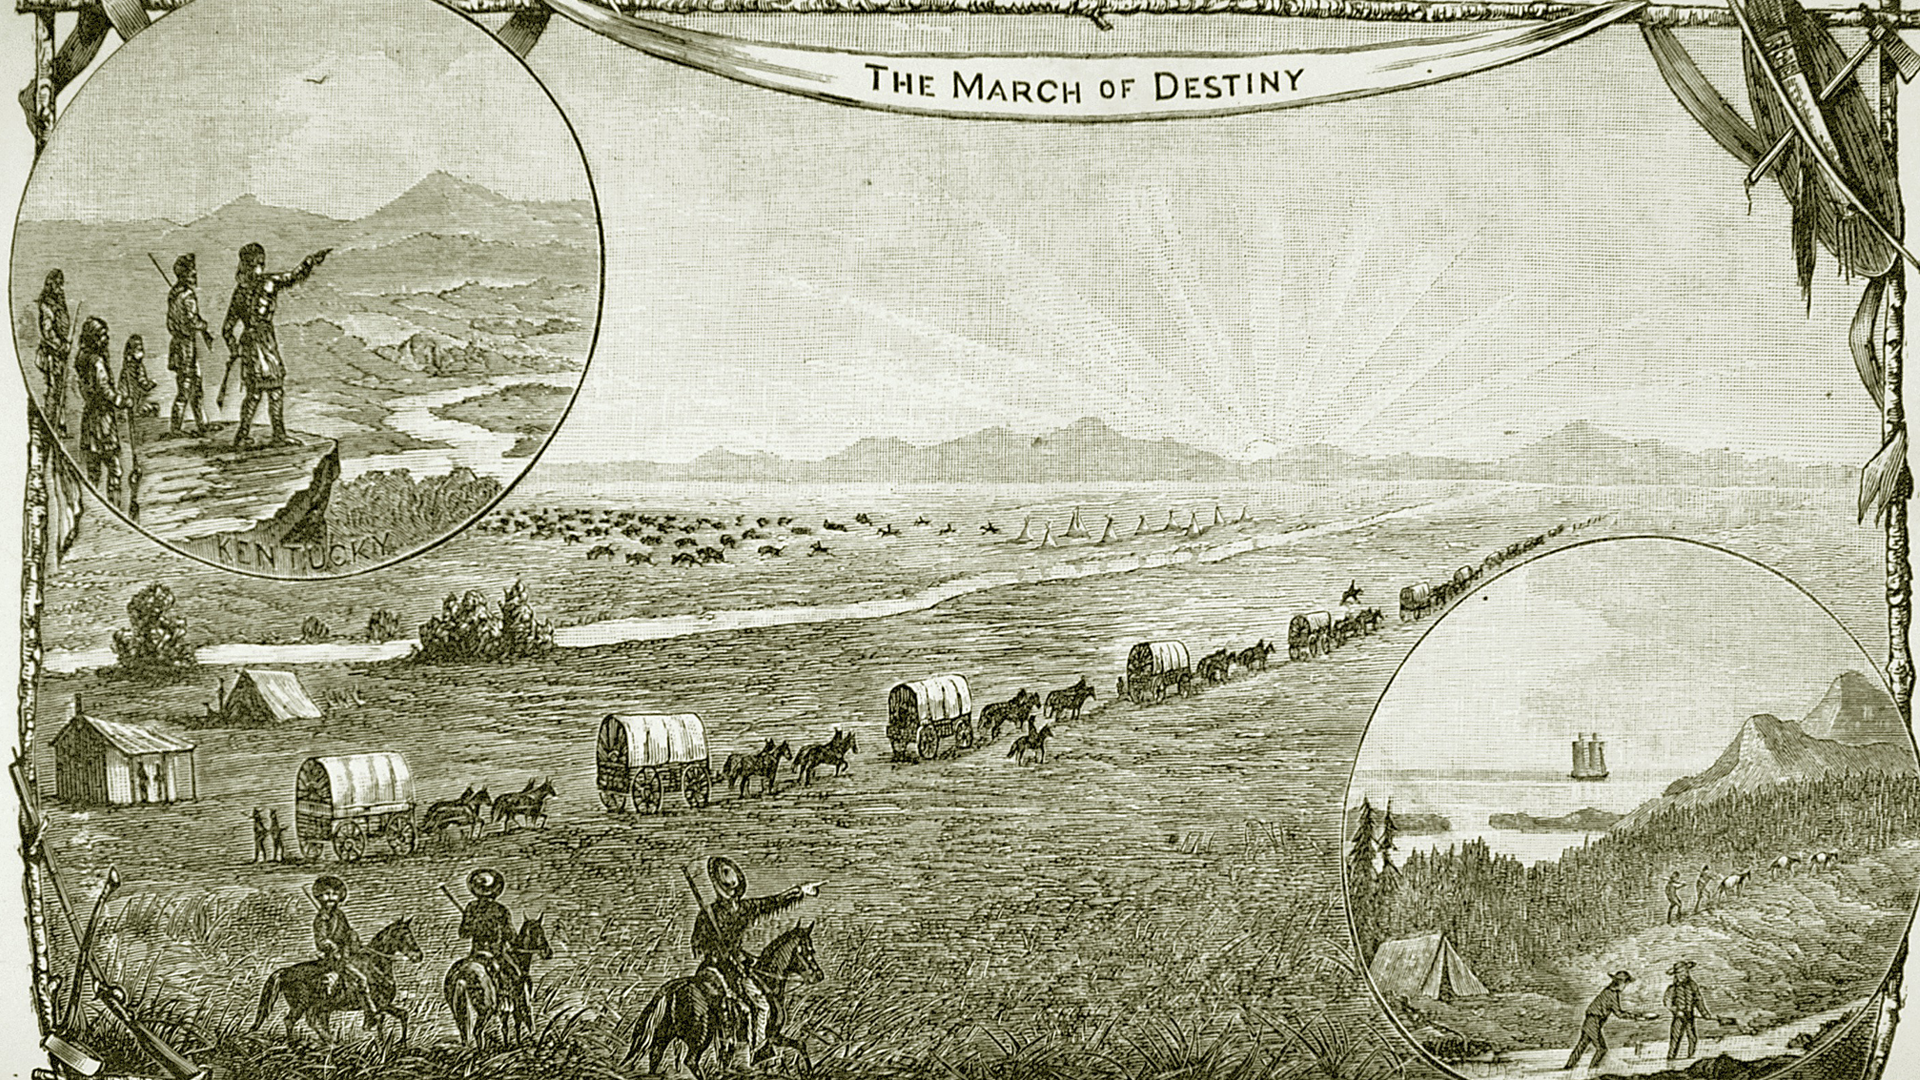 Illustration of a wagon trail, cowboys on horseback riding off into the horizon, a herd of Buffalo, and an Indian camp with Teepees. Inset illustrations: Upper Left: Kentucky, men stand on top of cliff pointing and looking westward. Lower Right: California, men sifting for gold in a river